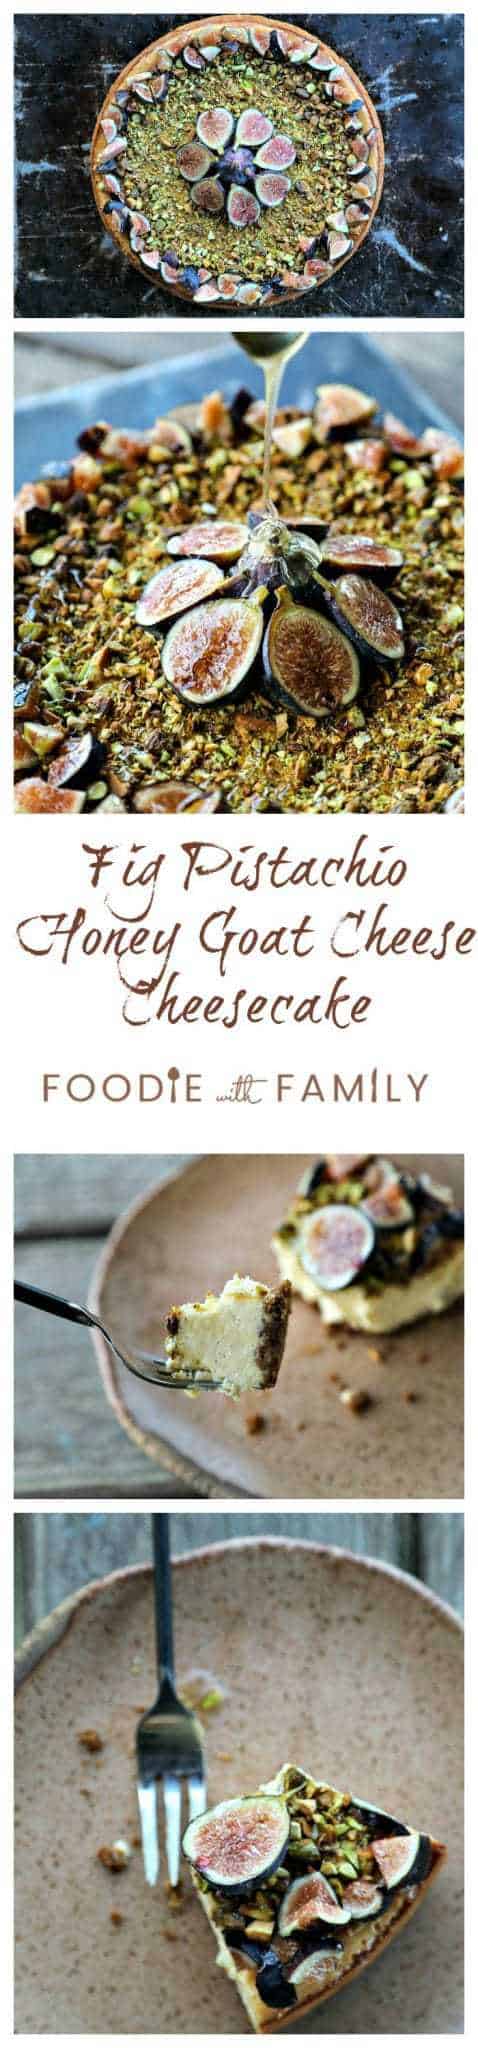 Ultra-creamy, not too sweet, and a feast-for-the-eyes while still being simple to make, this vanilla bean flecked Fig Pistachio Honey Goat Cheese Cheesecake is a show stopper!